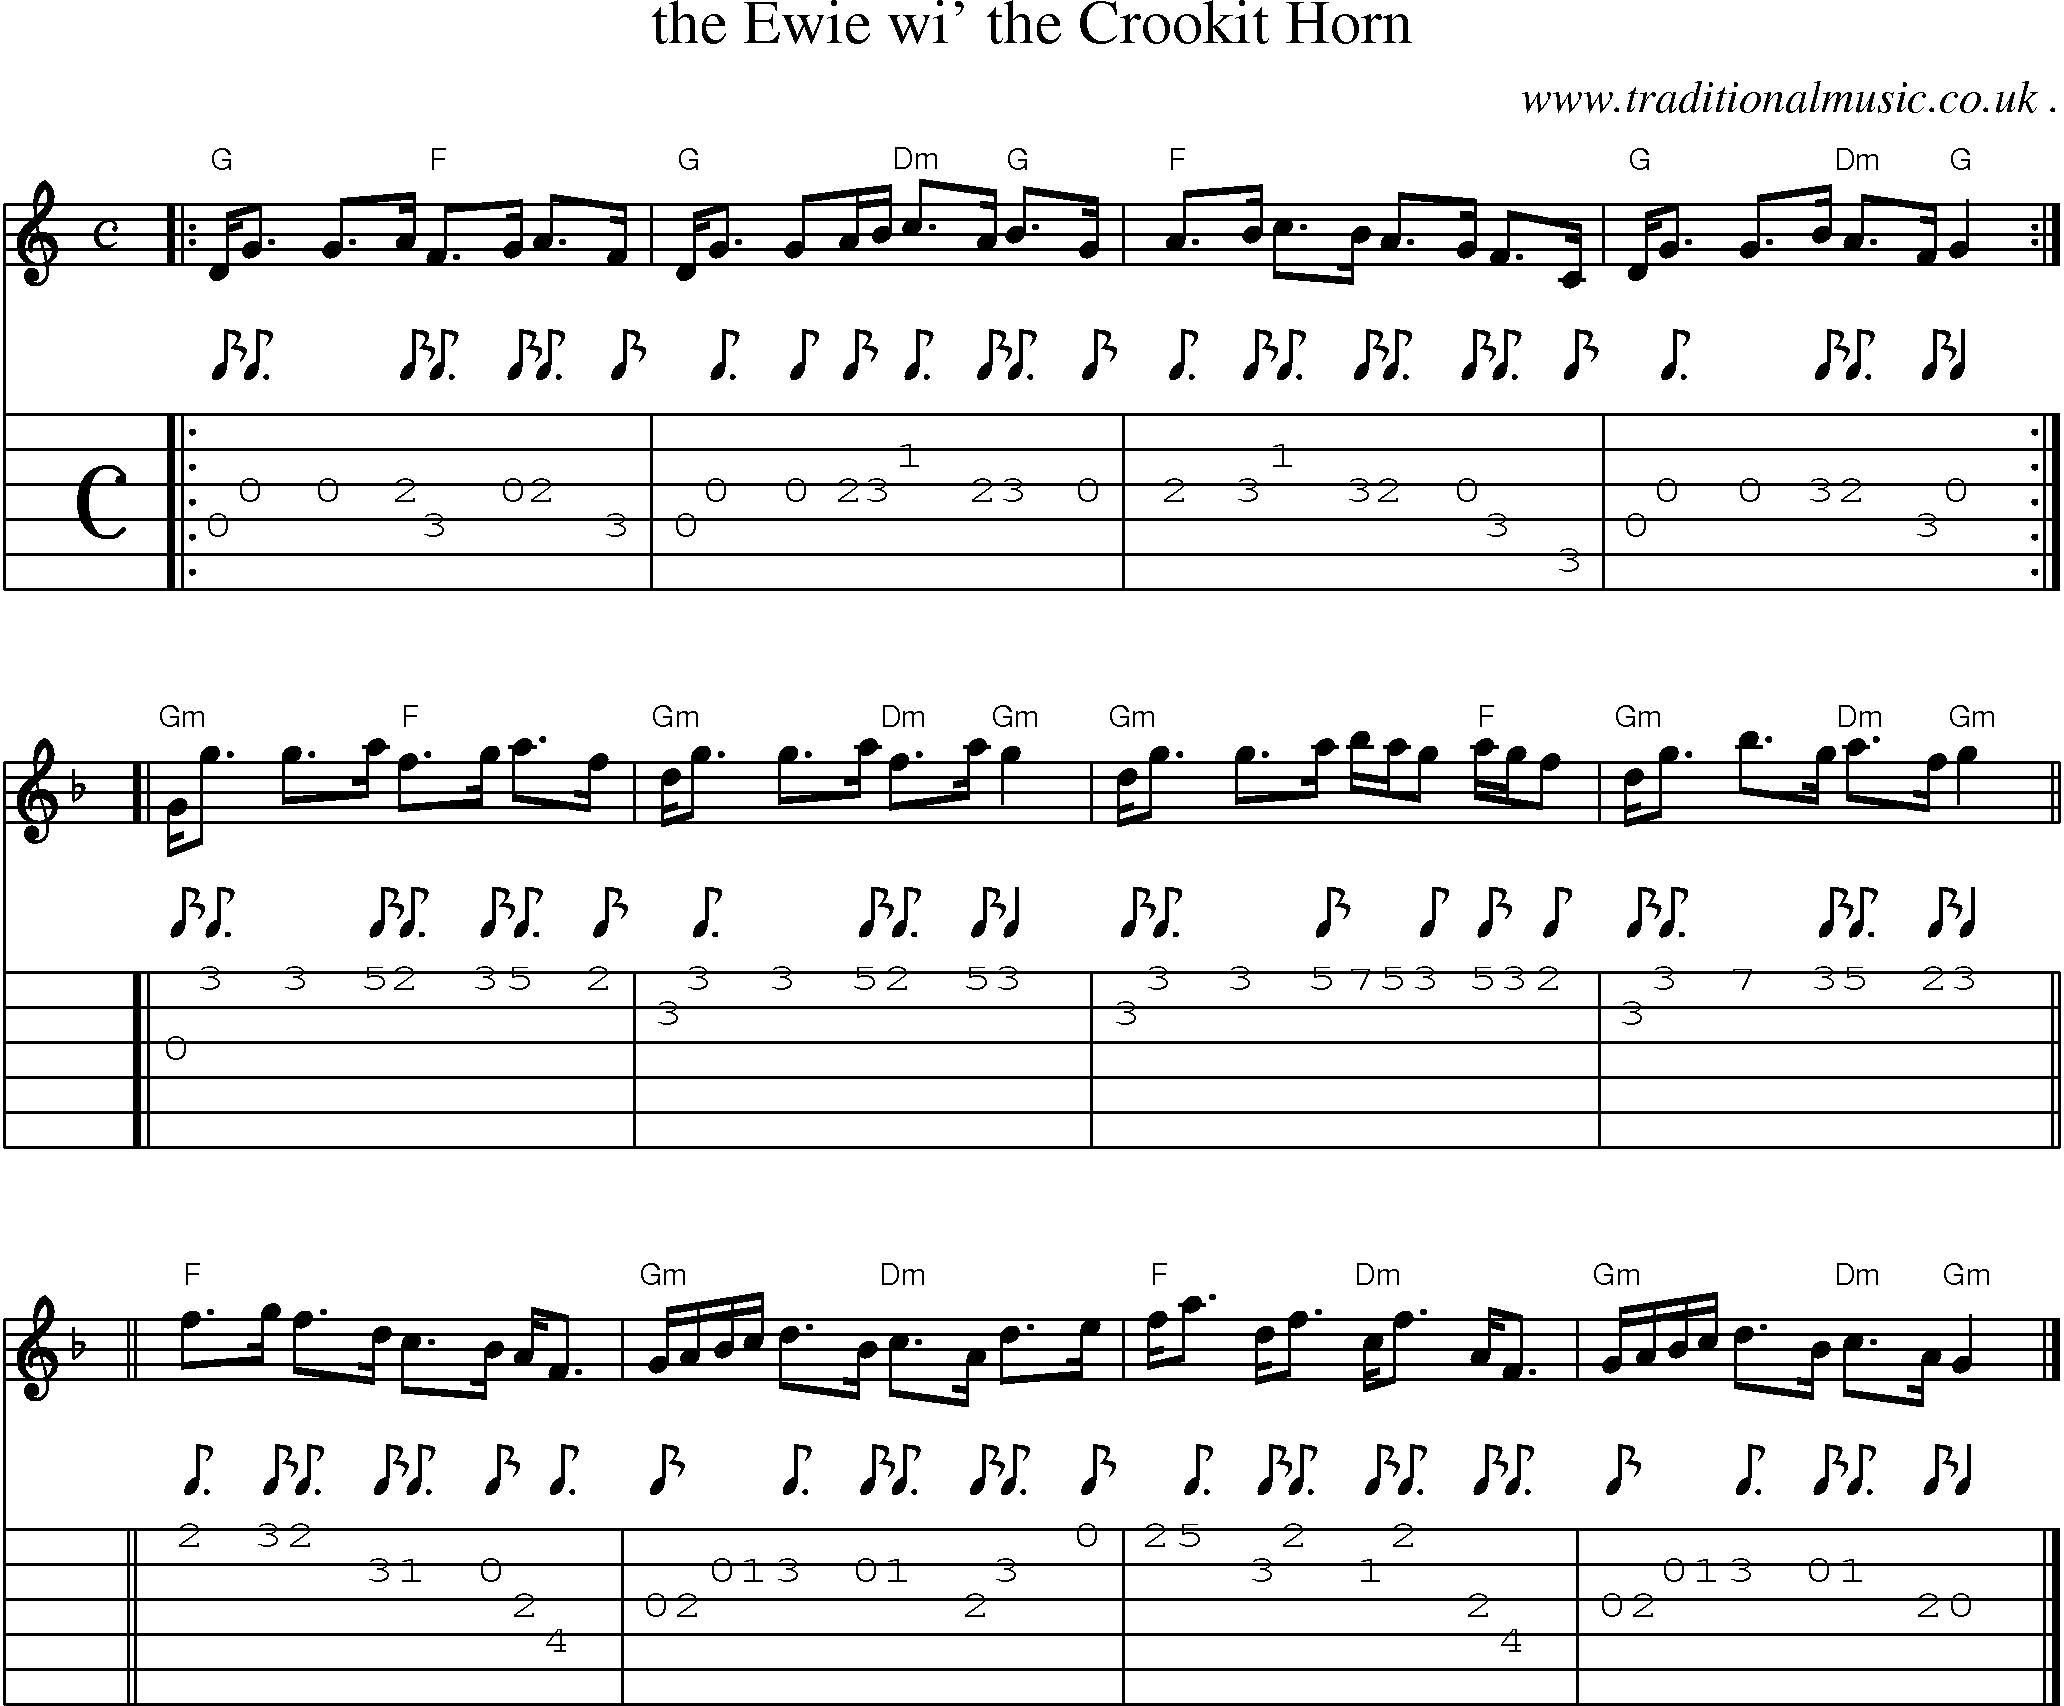 Sheet-music  score, Chords and Guitar Tabs for The Ewie Wi The Crookit Horn